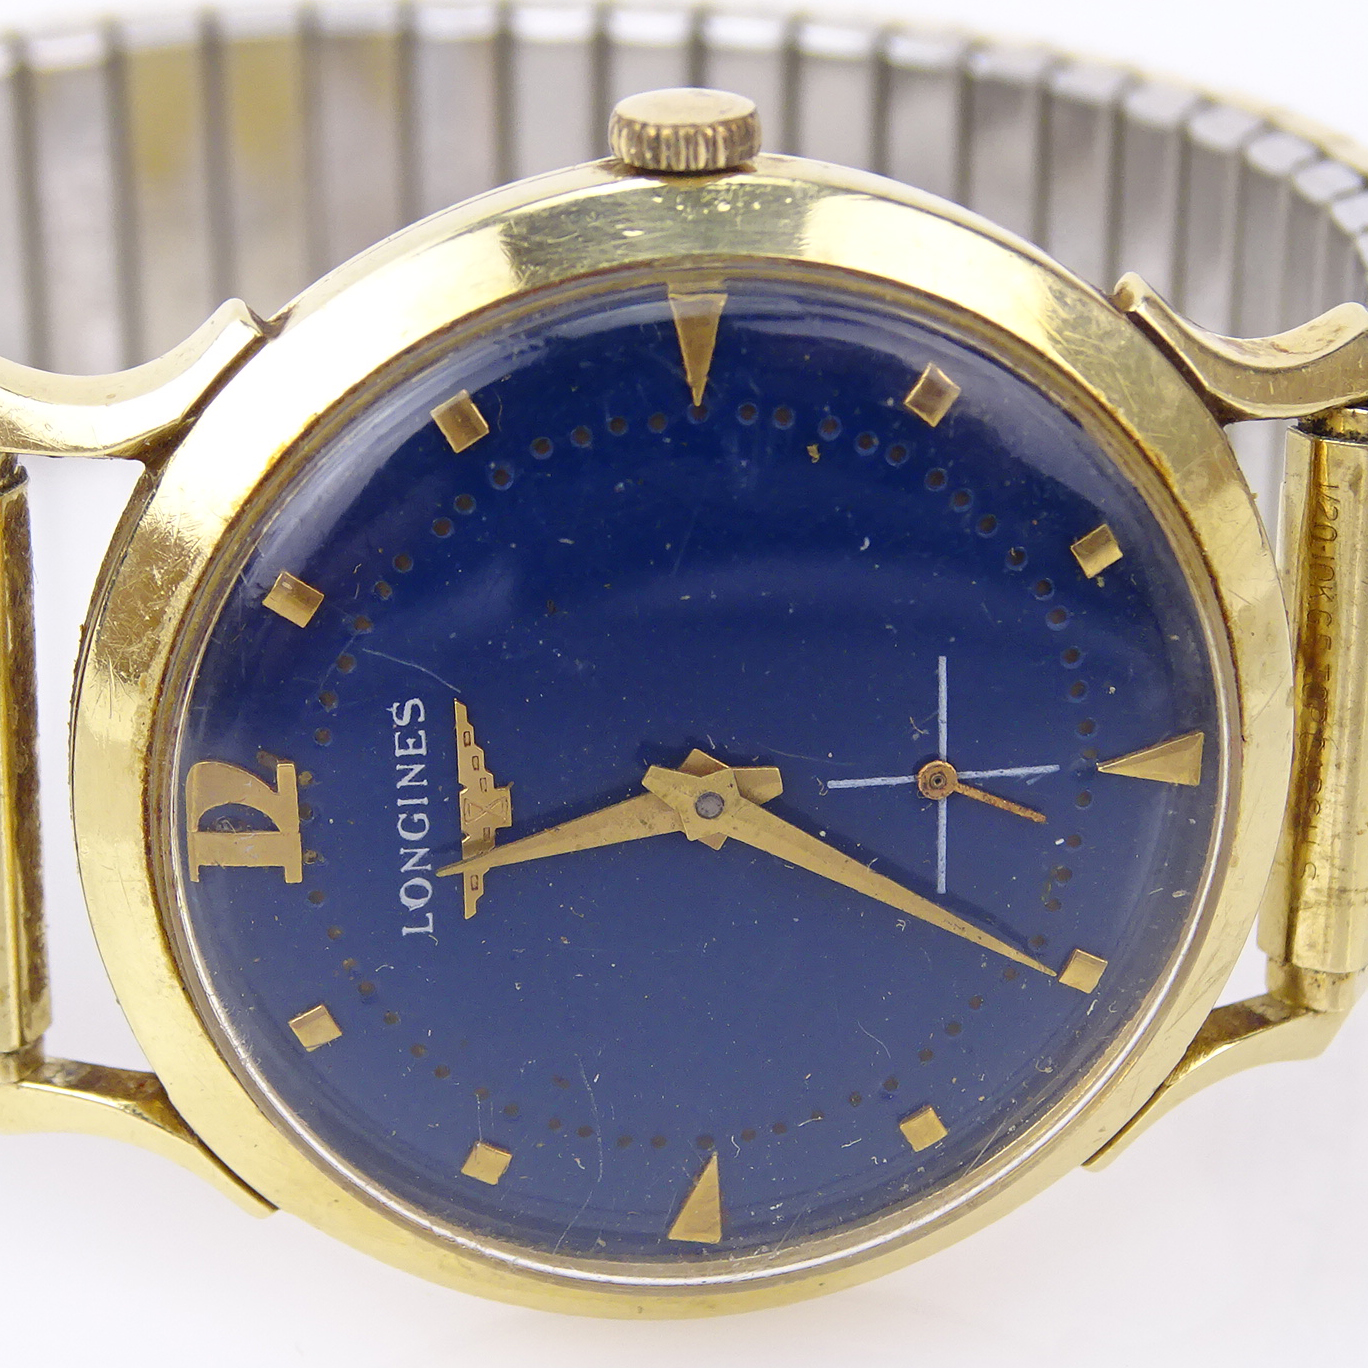 Man's Circa 1950s Longines Wittnauer 14 Karat Yellow Gold Watch with Blue Enamel Dial, Manual Movement and Twist on metal Bracelet